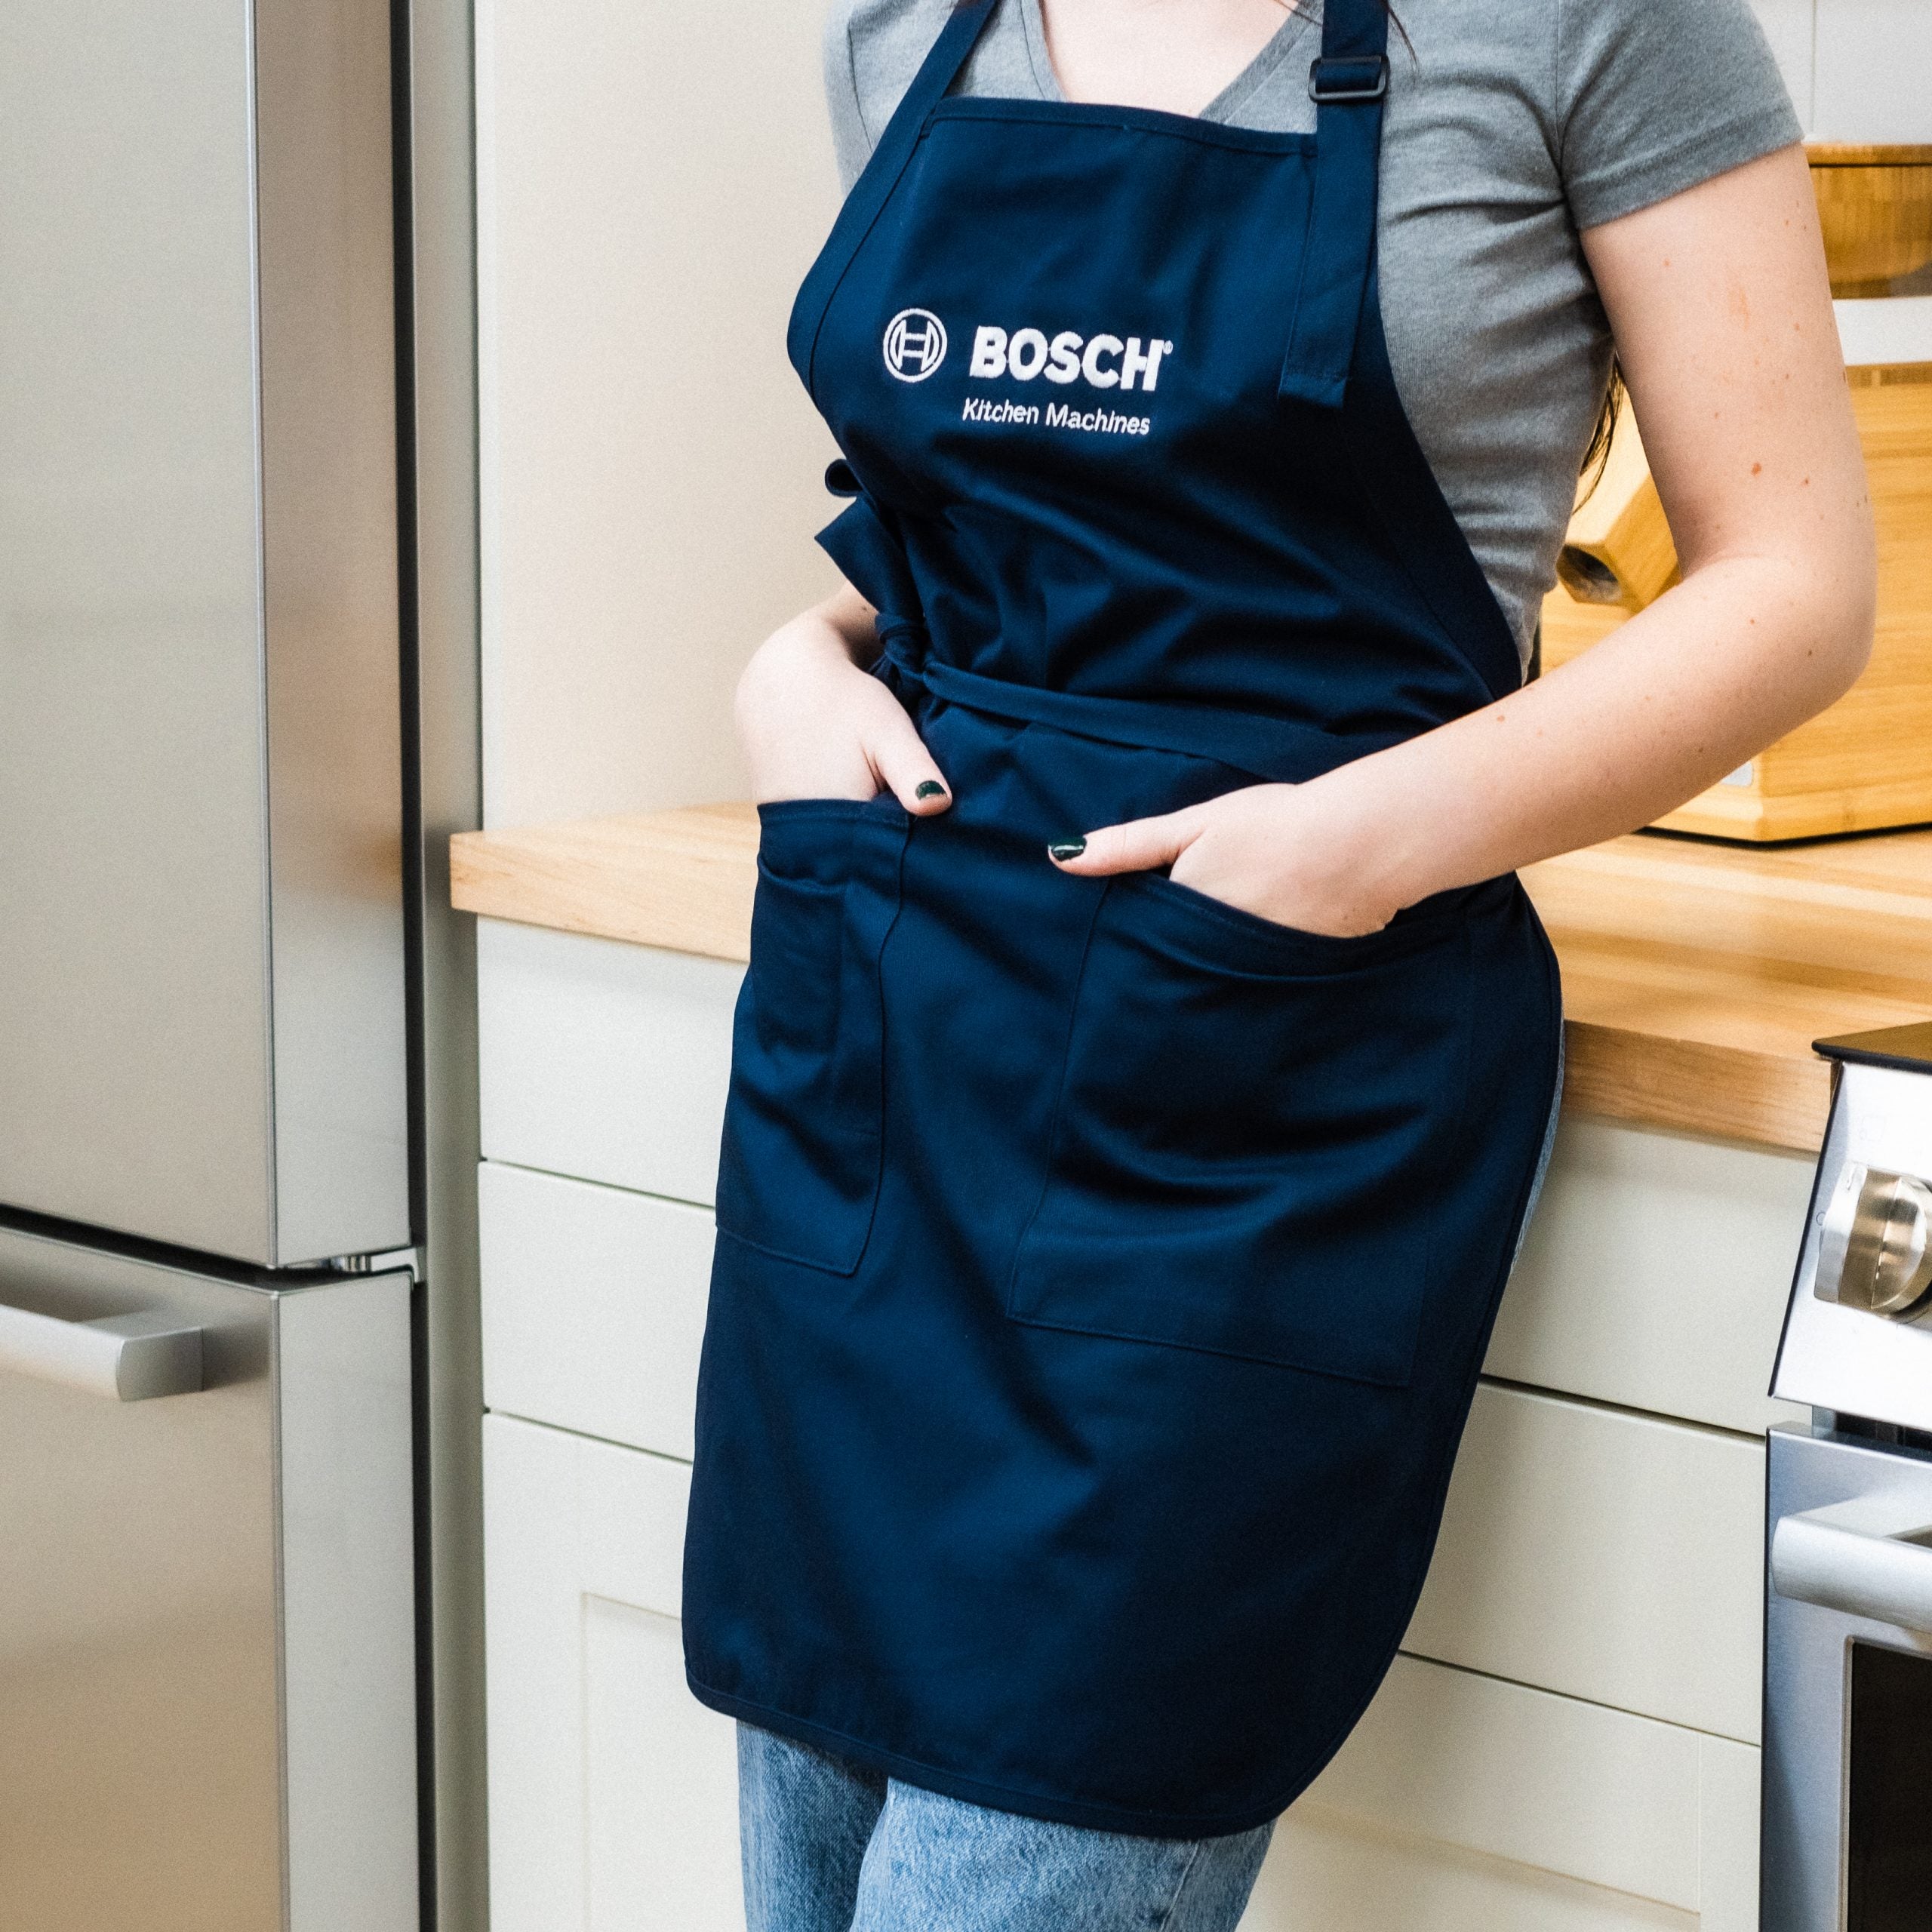 Bosch Kitchen Apron  For us "Foodies"